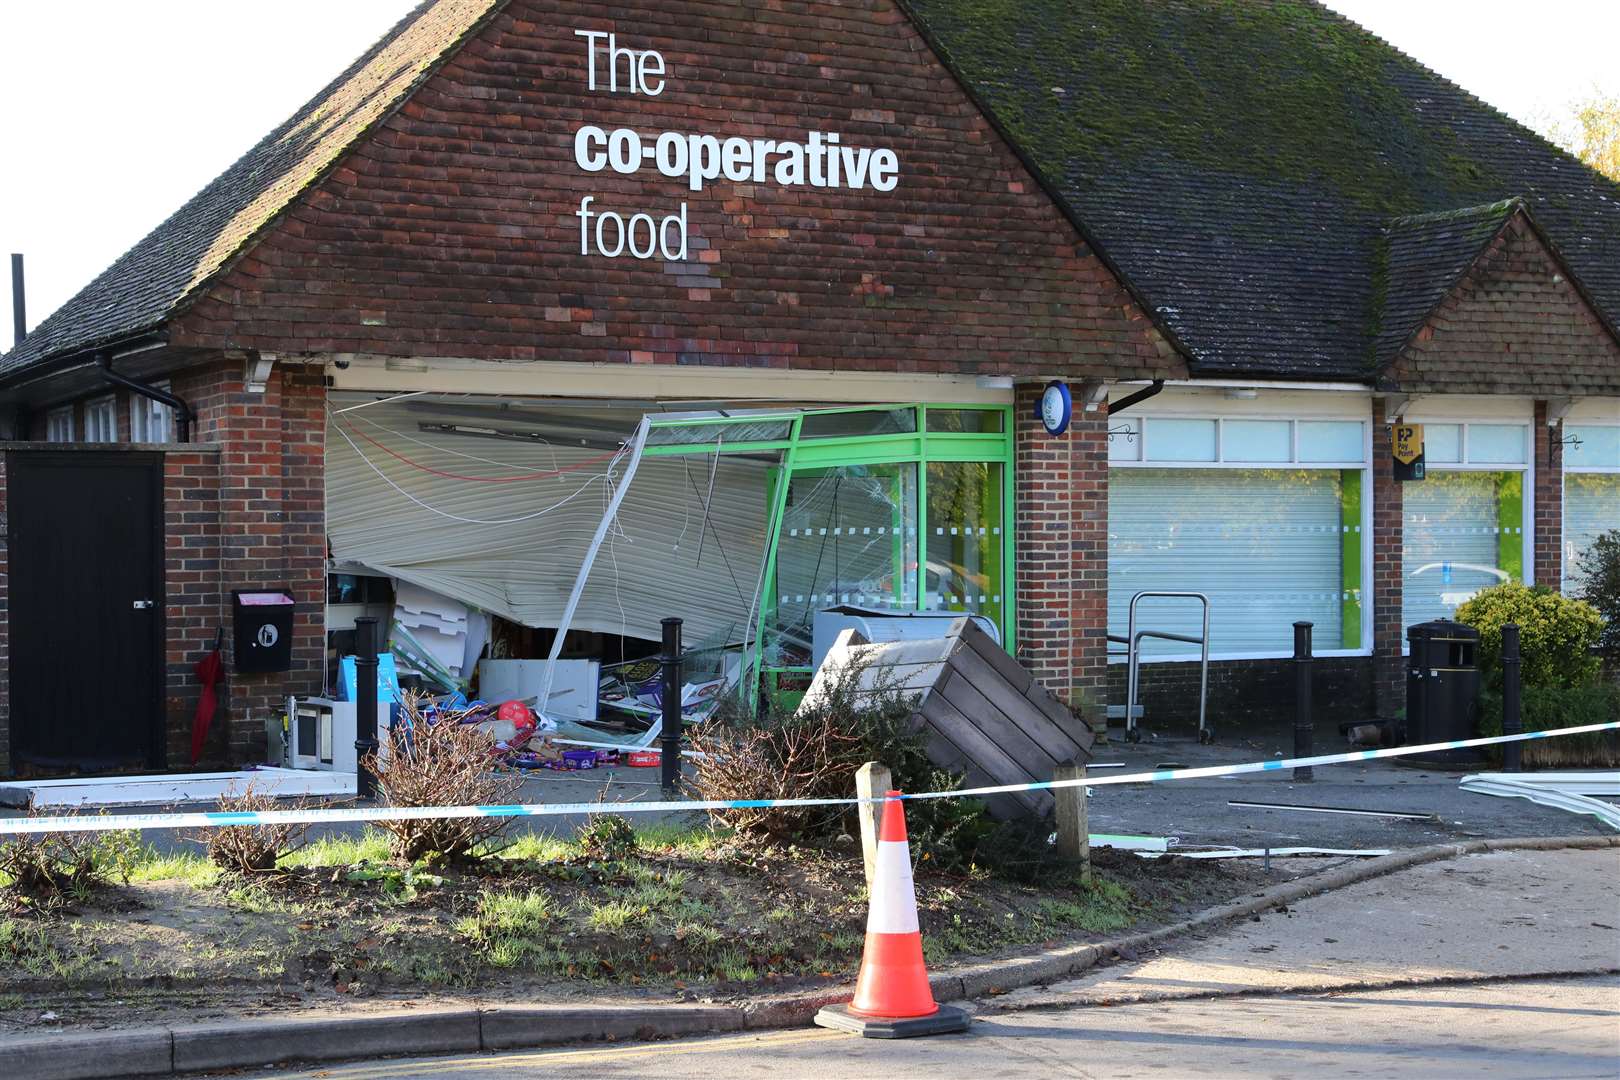 The Co-op in Wye was ram raided by a 4x4